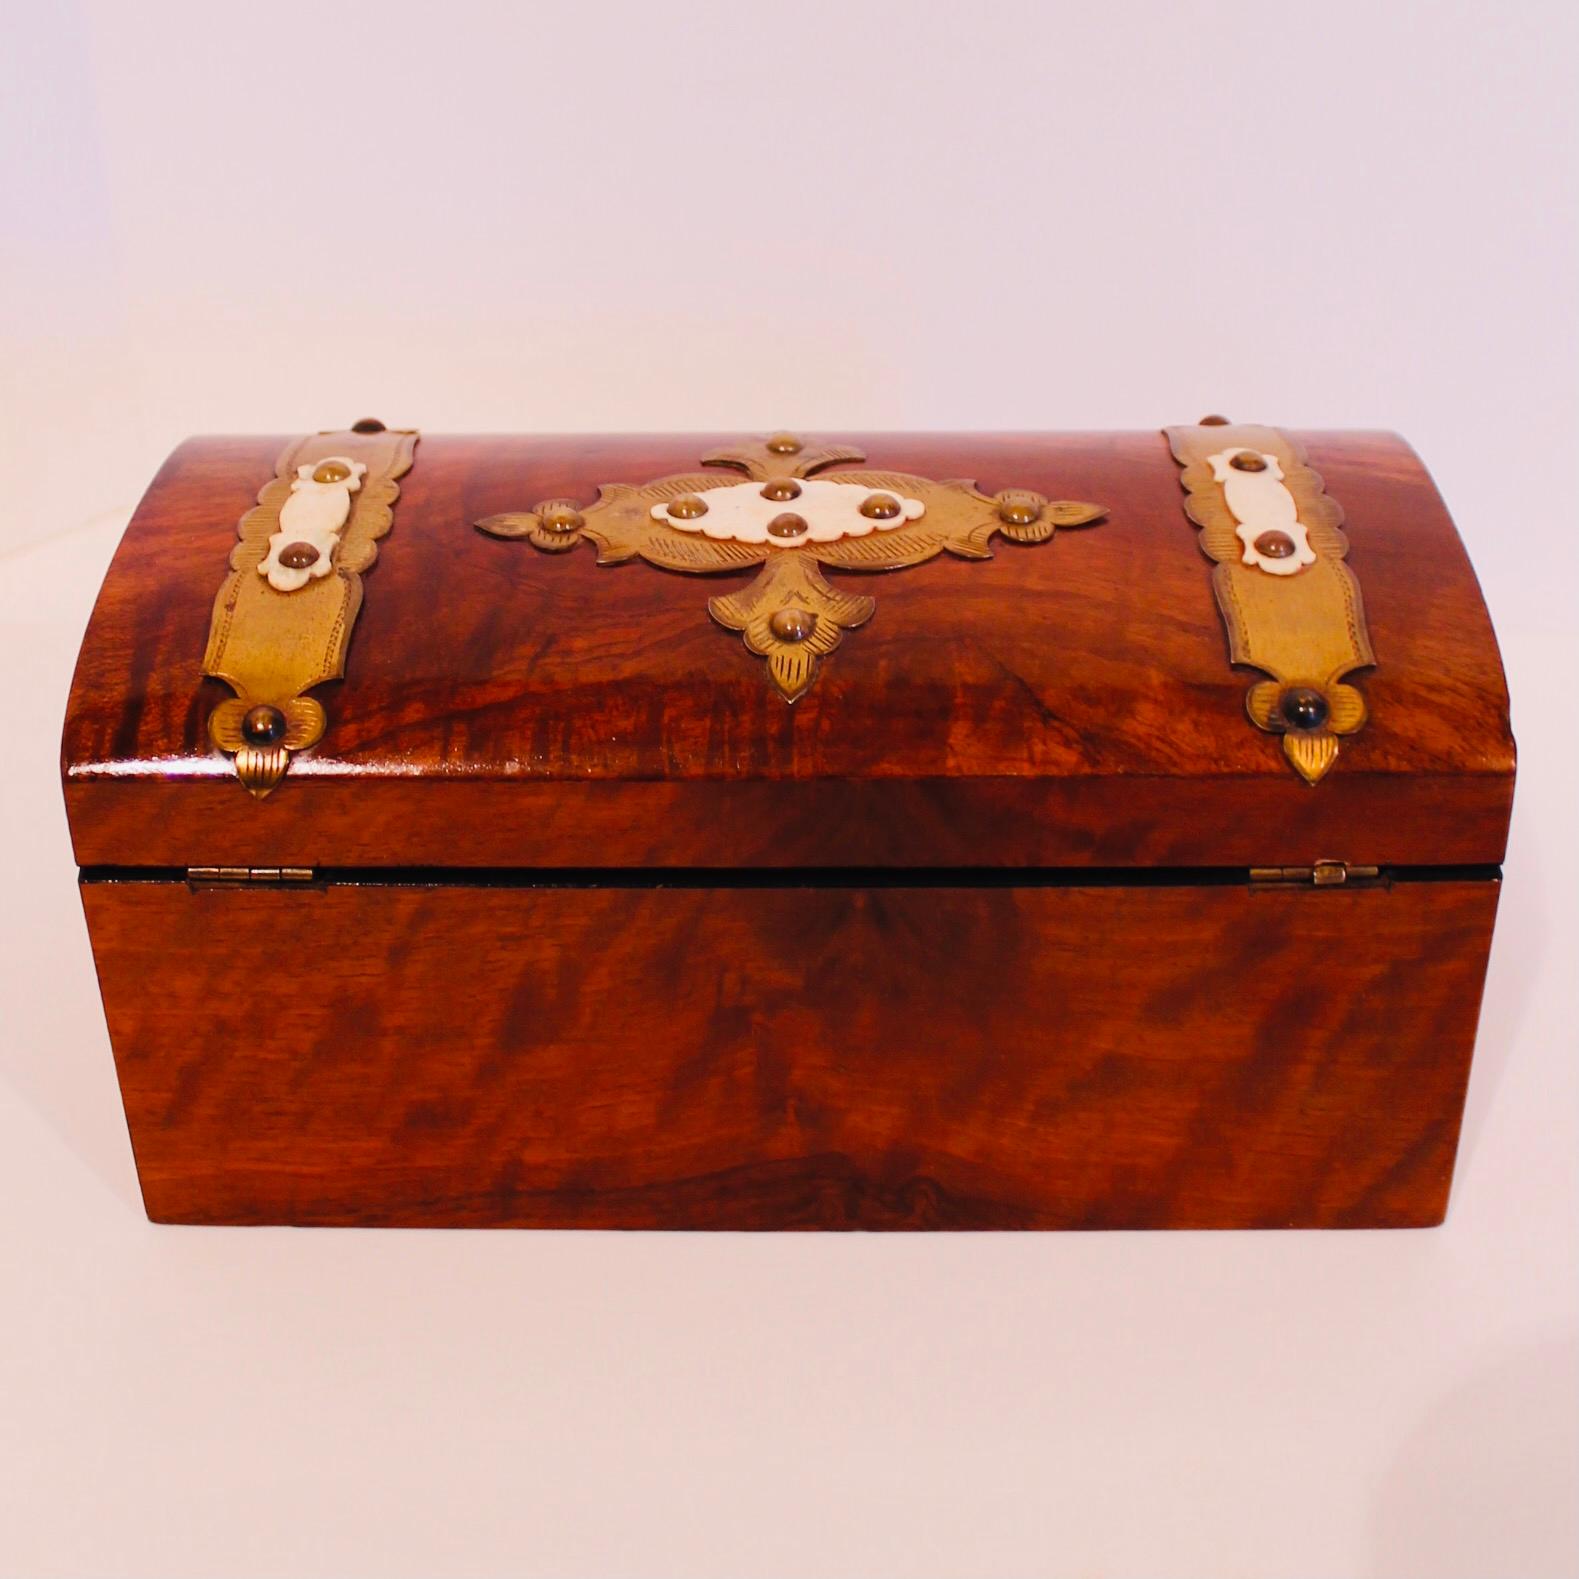 English Burl Walnut Tea Caddy With Decorative Brass Mounts In Good Condition For Sale In Free Union, VA